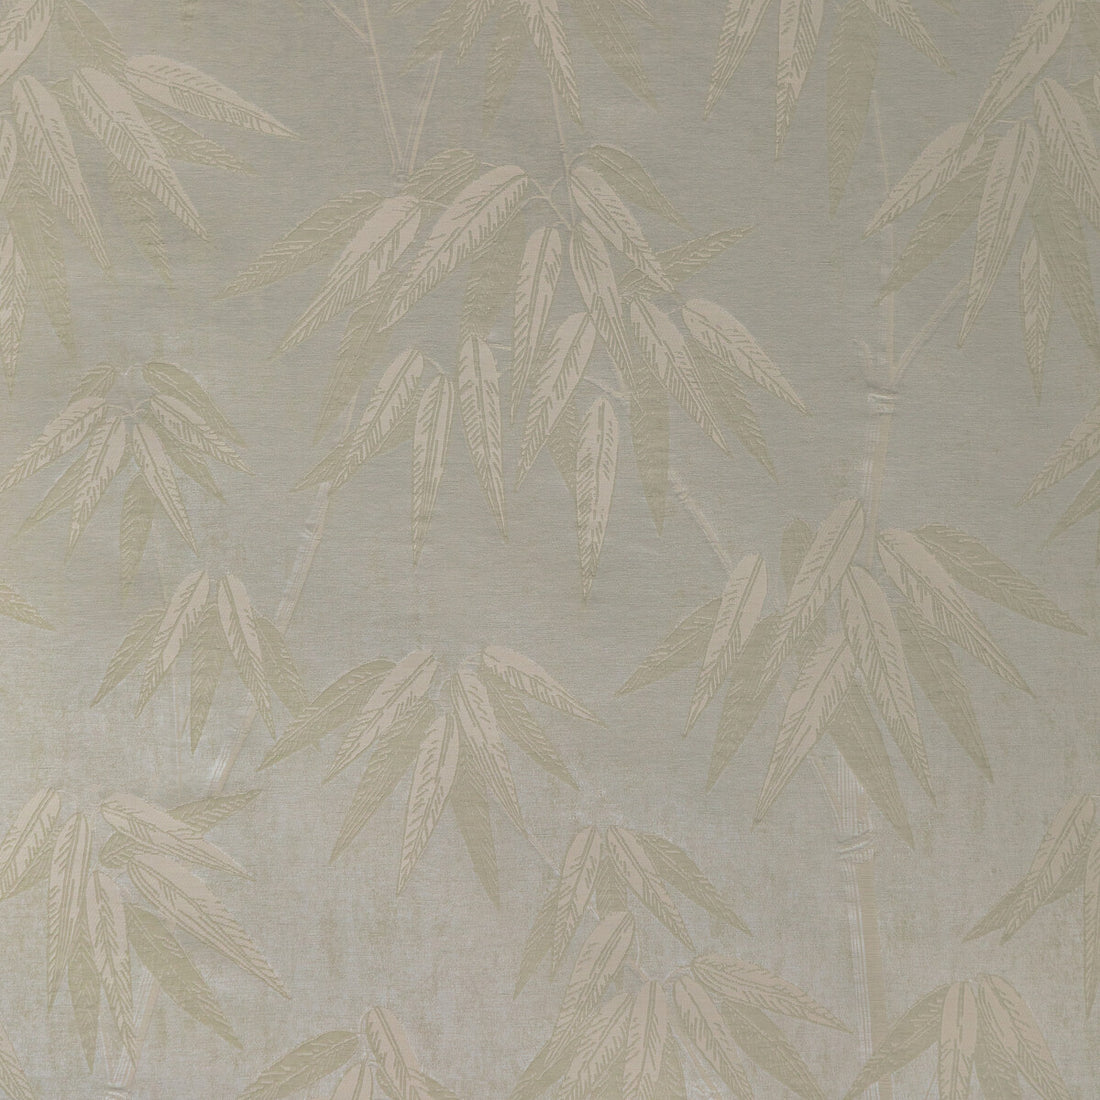 Bamboo Chic fabric in cream color - pattern 4958.16.0 - by Kravet Couture in the Modern Luxe Silk Luster collection